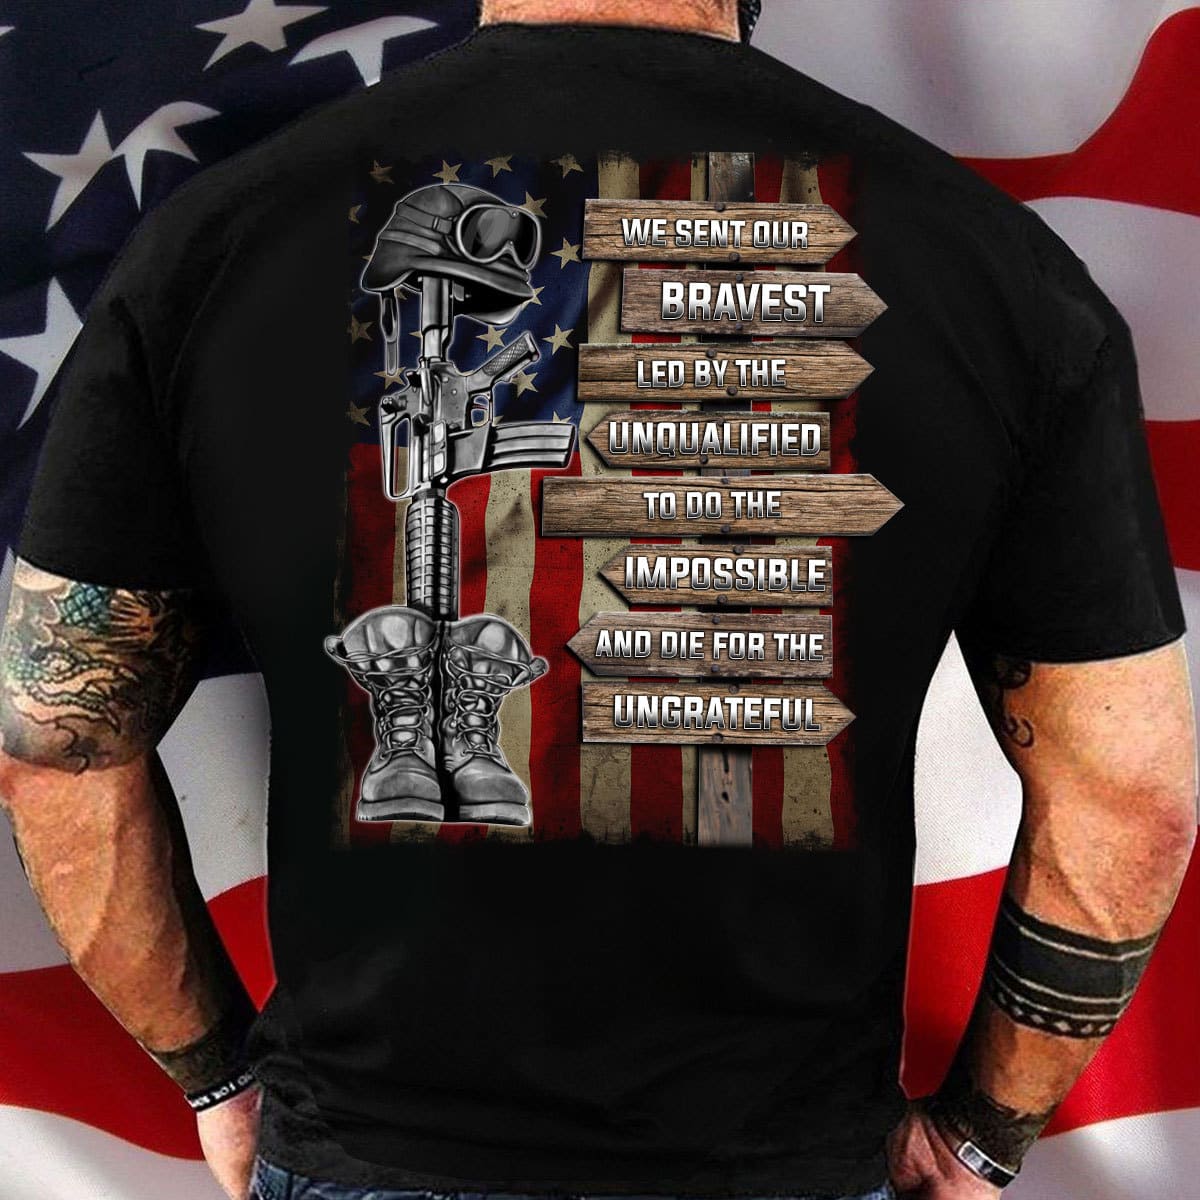 America Veteran Uniform - We sent our bravest led by the unqualified to do the impossible and die for the ungrateful